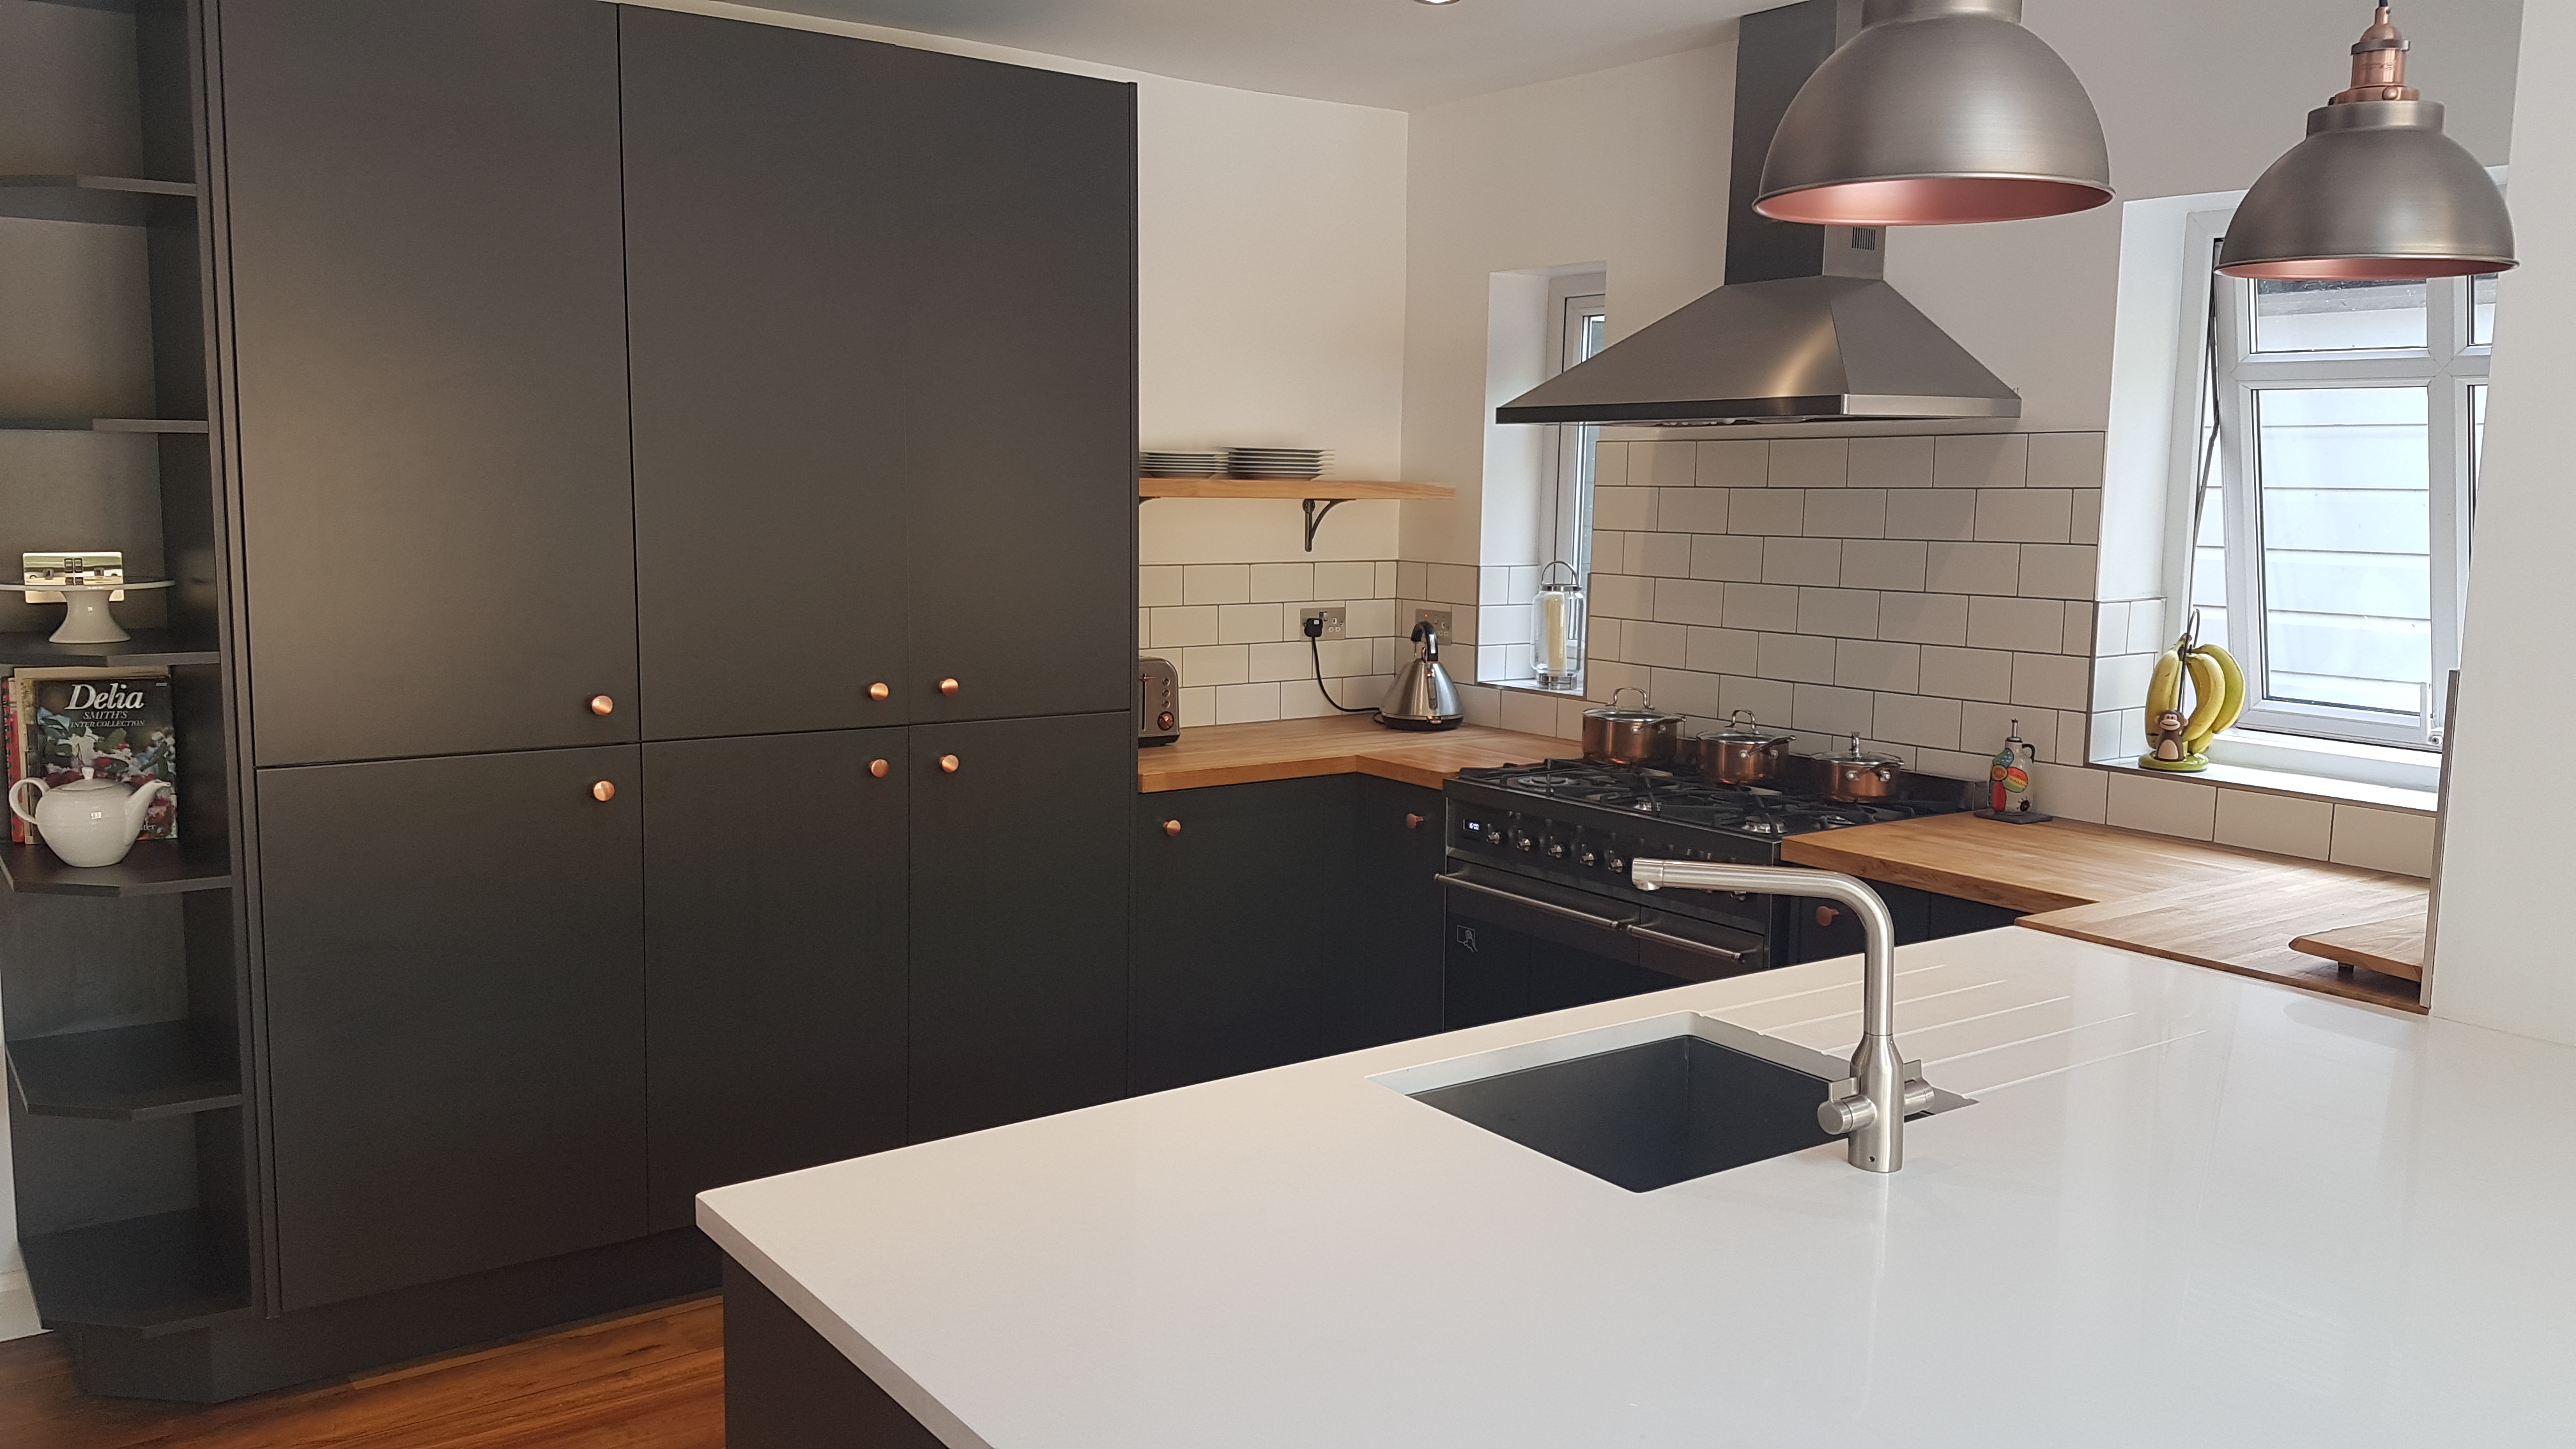 Croft Architecture plan the perfect kitchen with The Rigid Kitchen Company